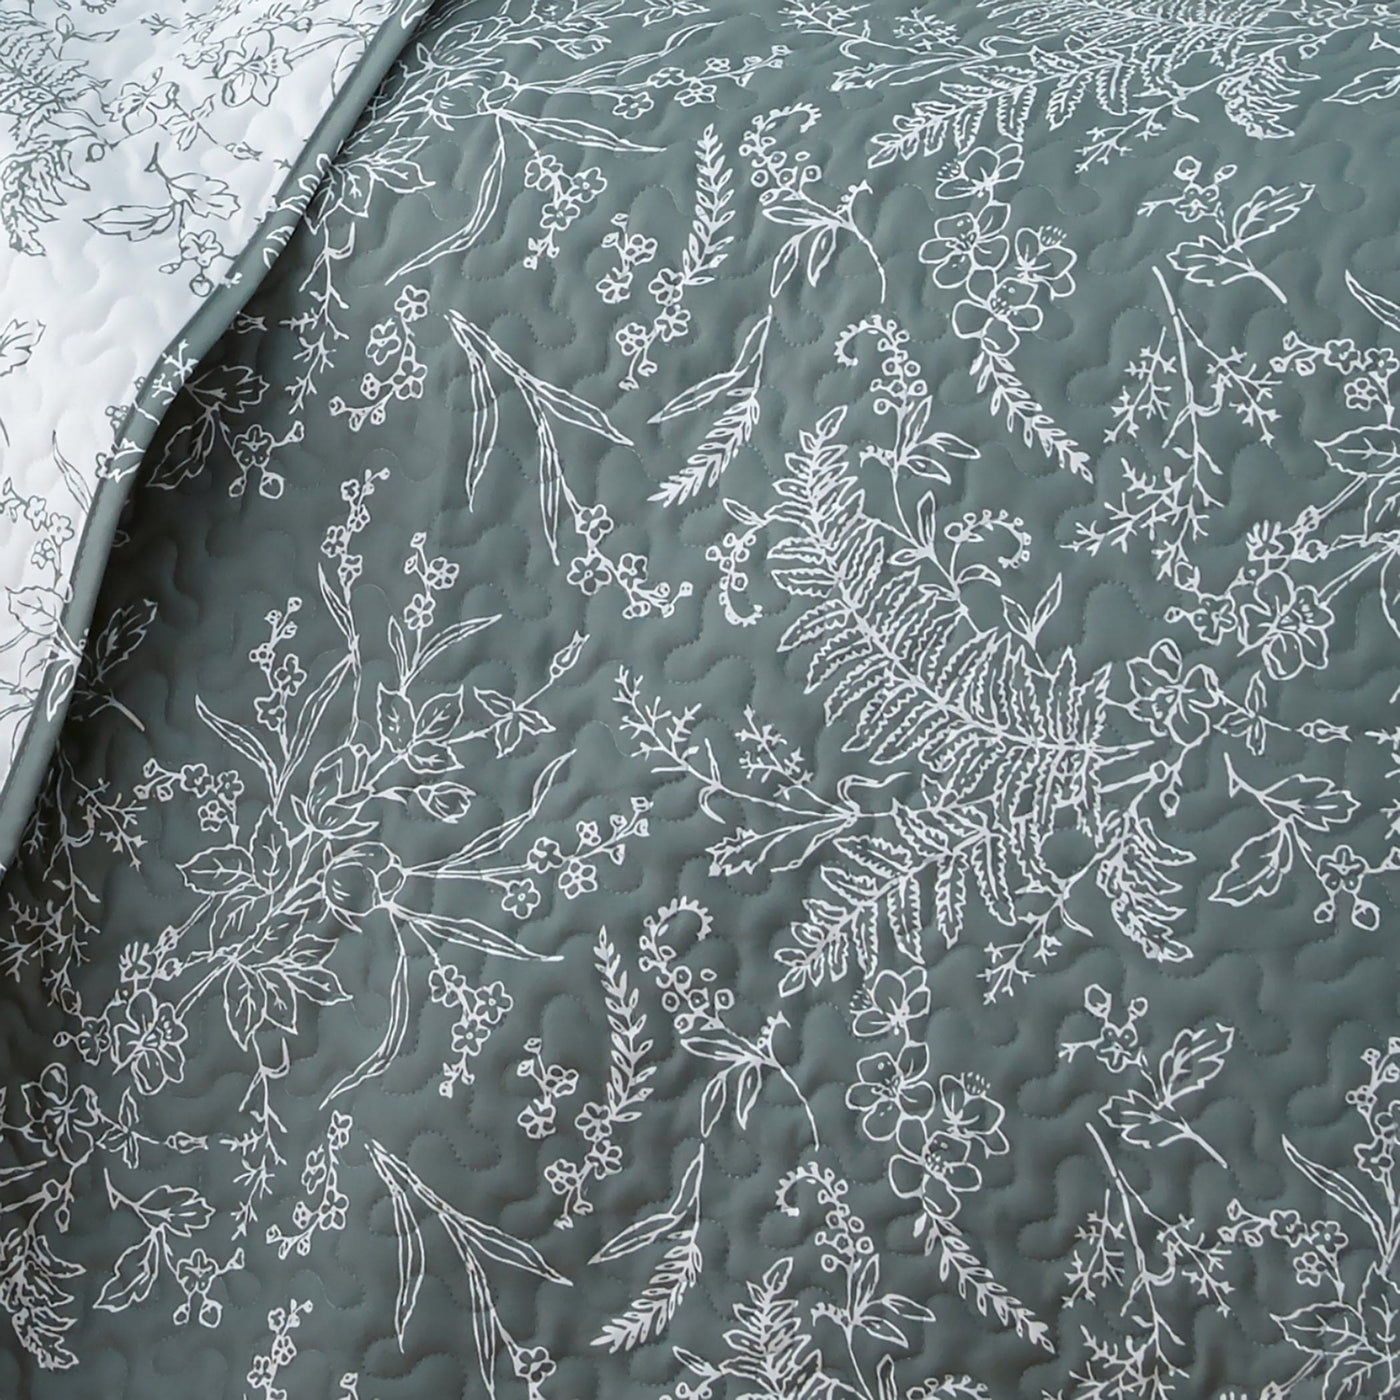 Details and Texture of Winter Brush Reversible Quilt Set in Teal#color_winter-brush-teal